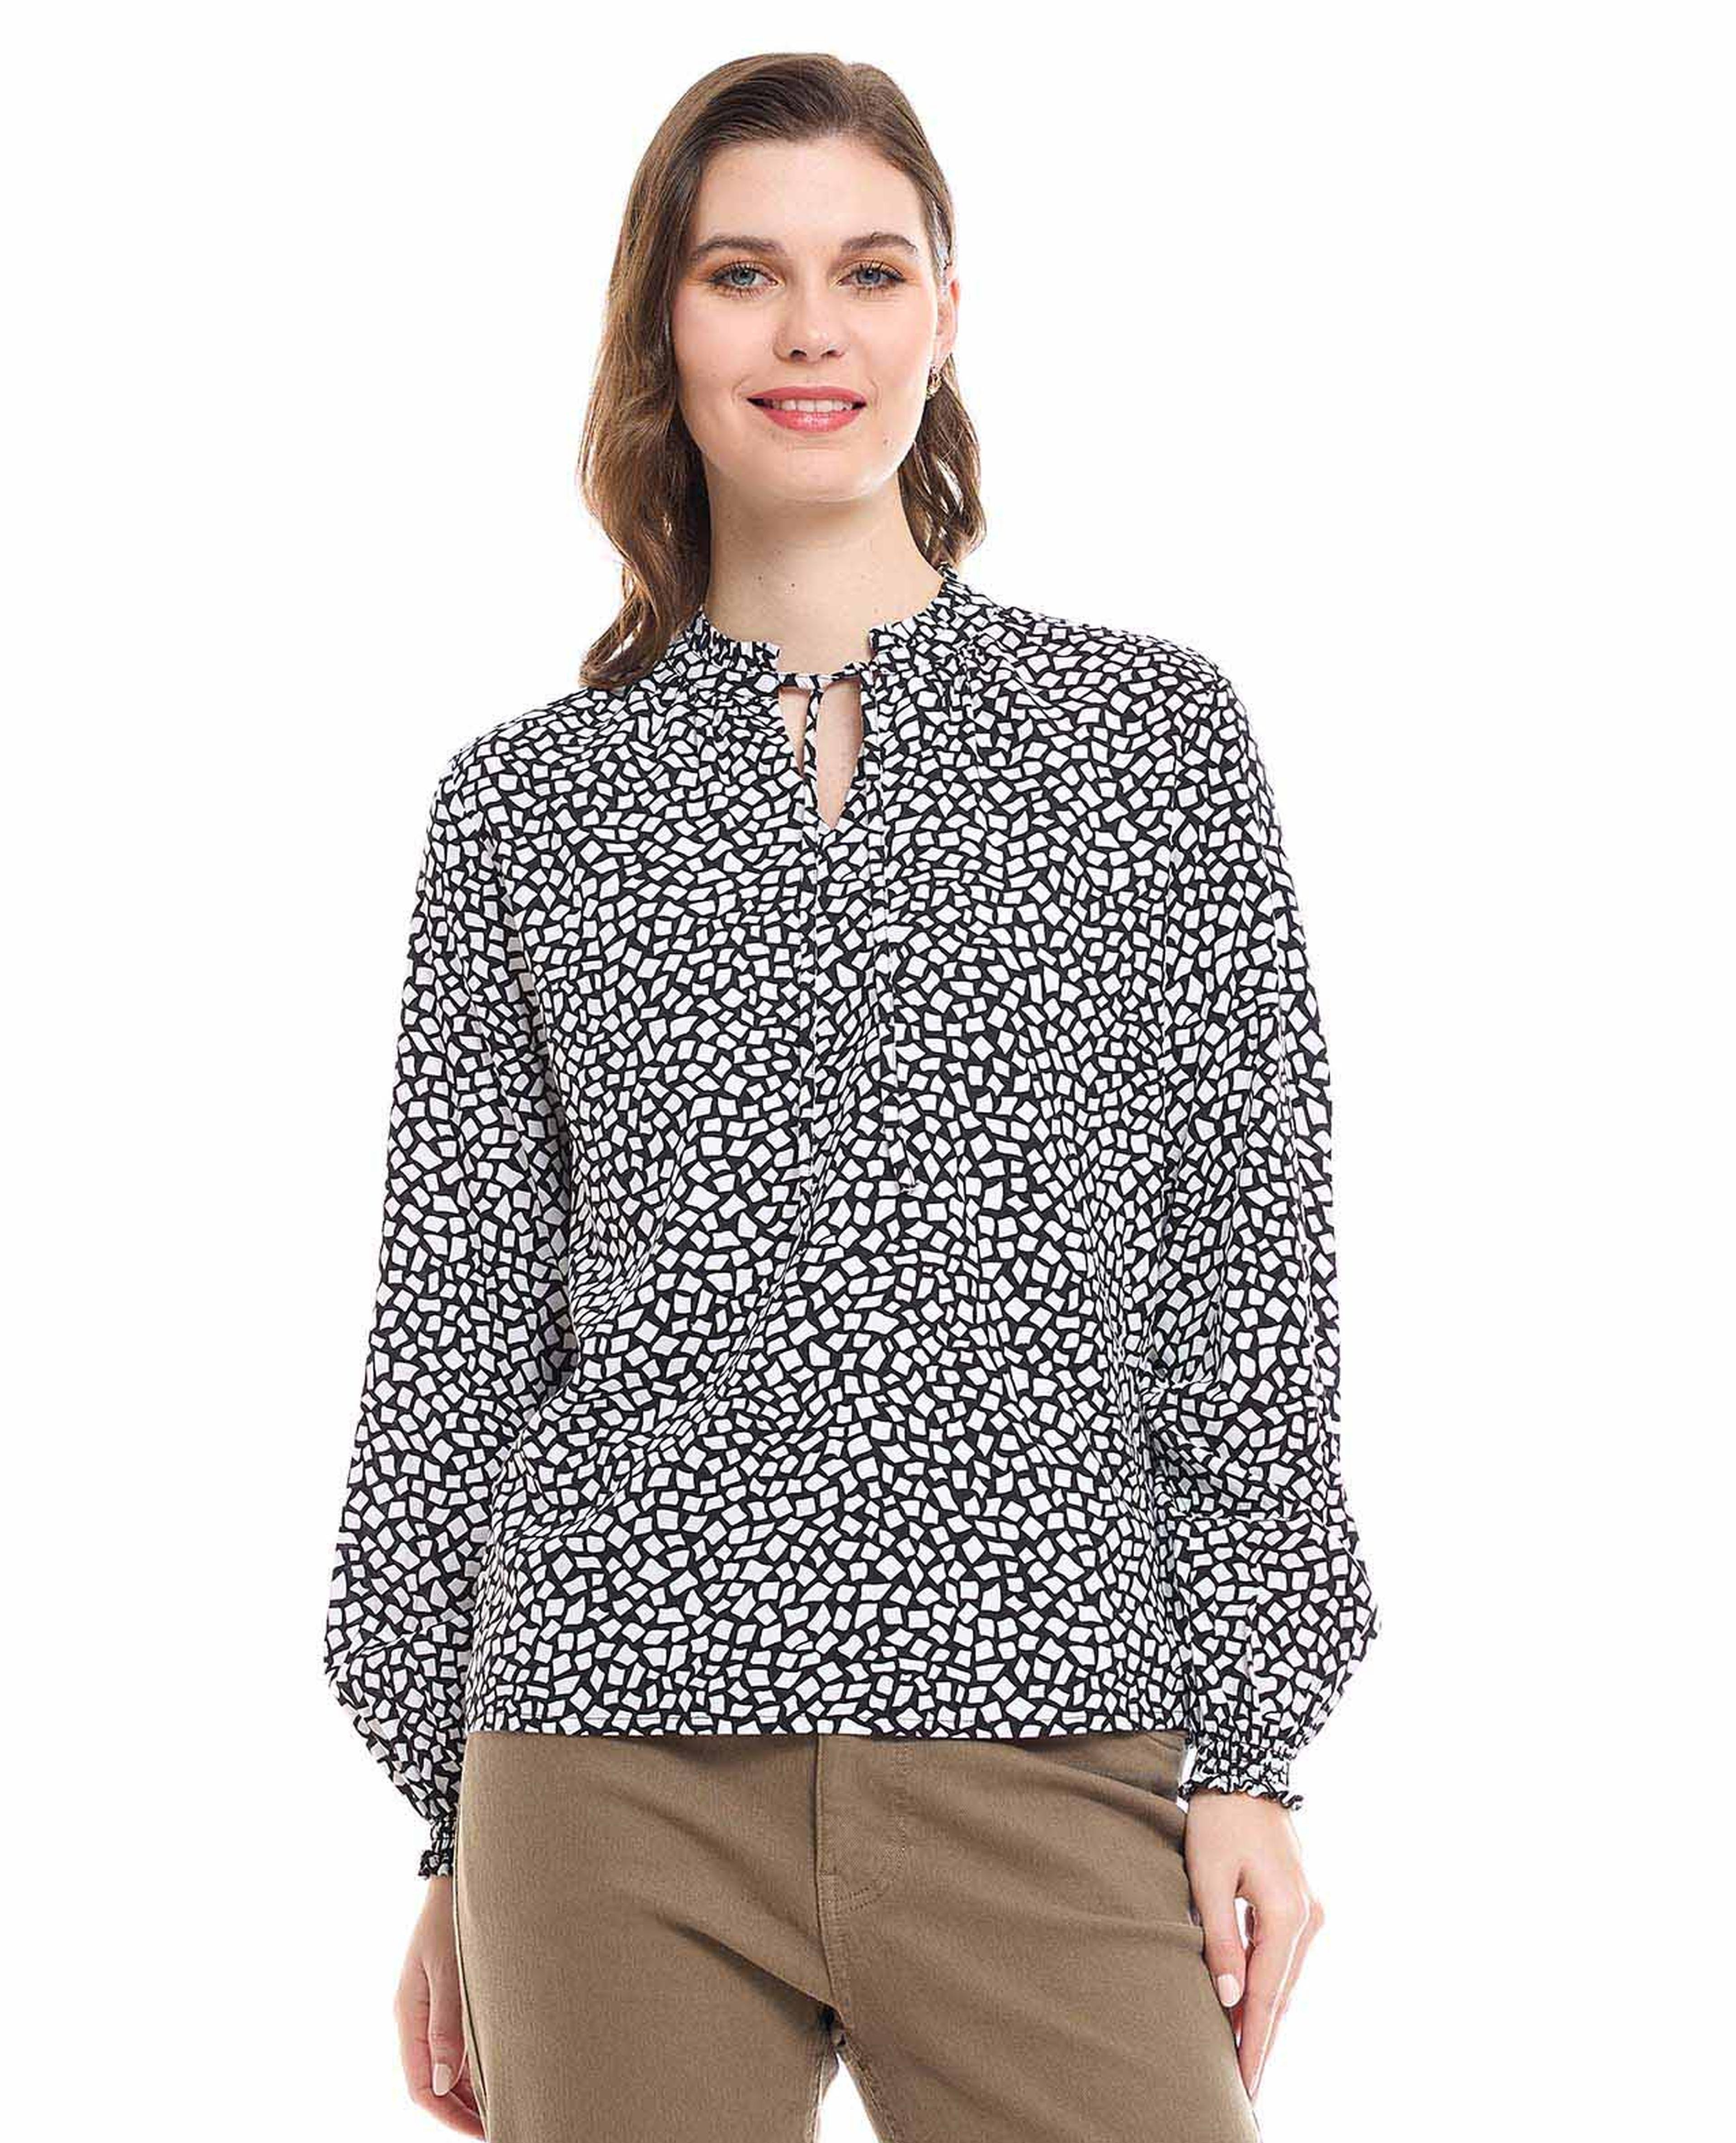 Patterned Top with Tie-Up Neck and Bishop Sleeves